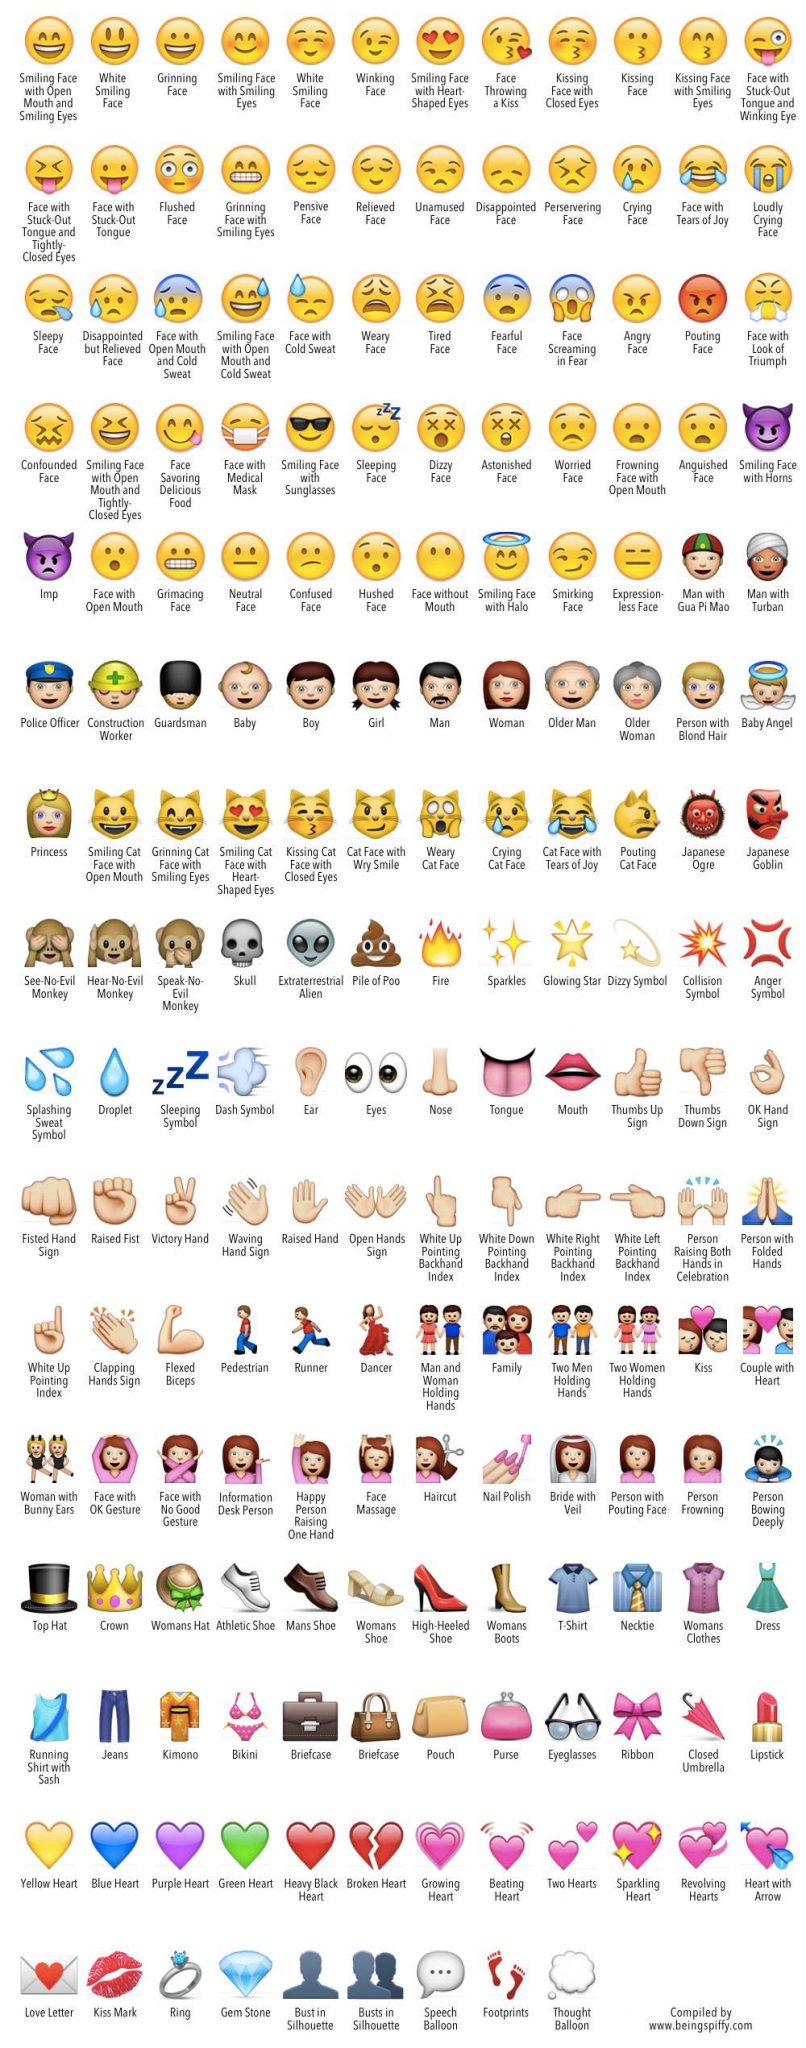 emoji faces, list of emoticons, meaning for emojis, smiley icons meaning, emoji faces and meanings